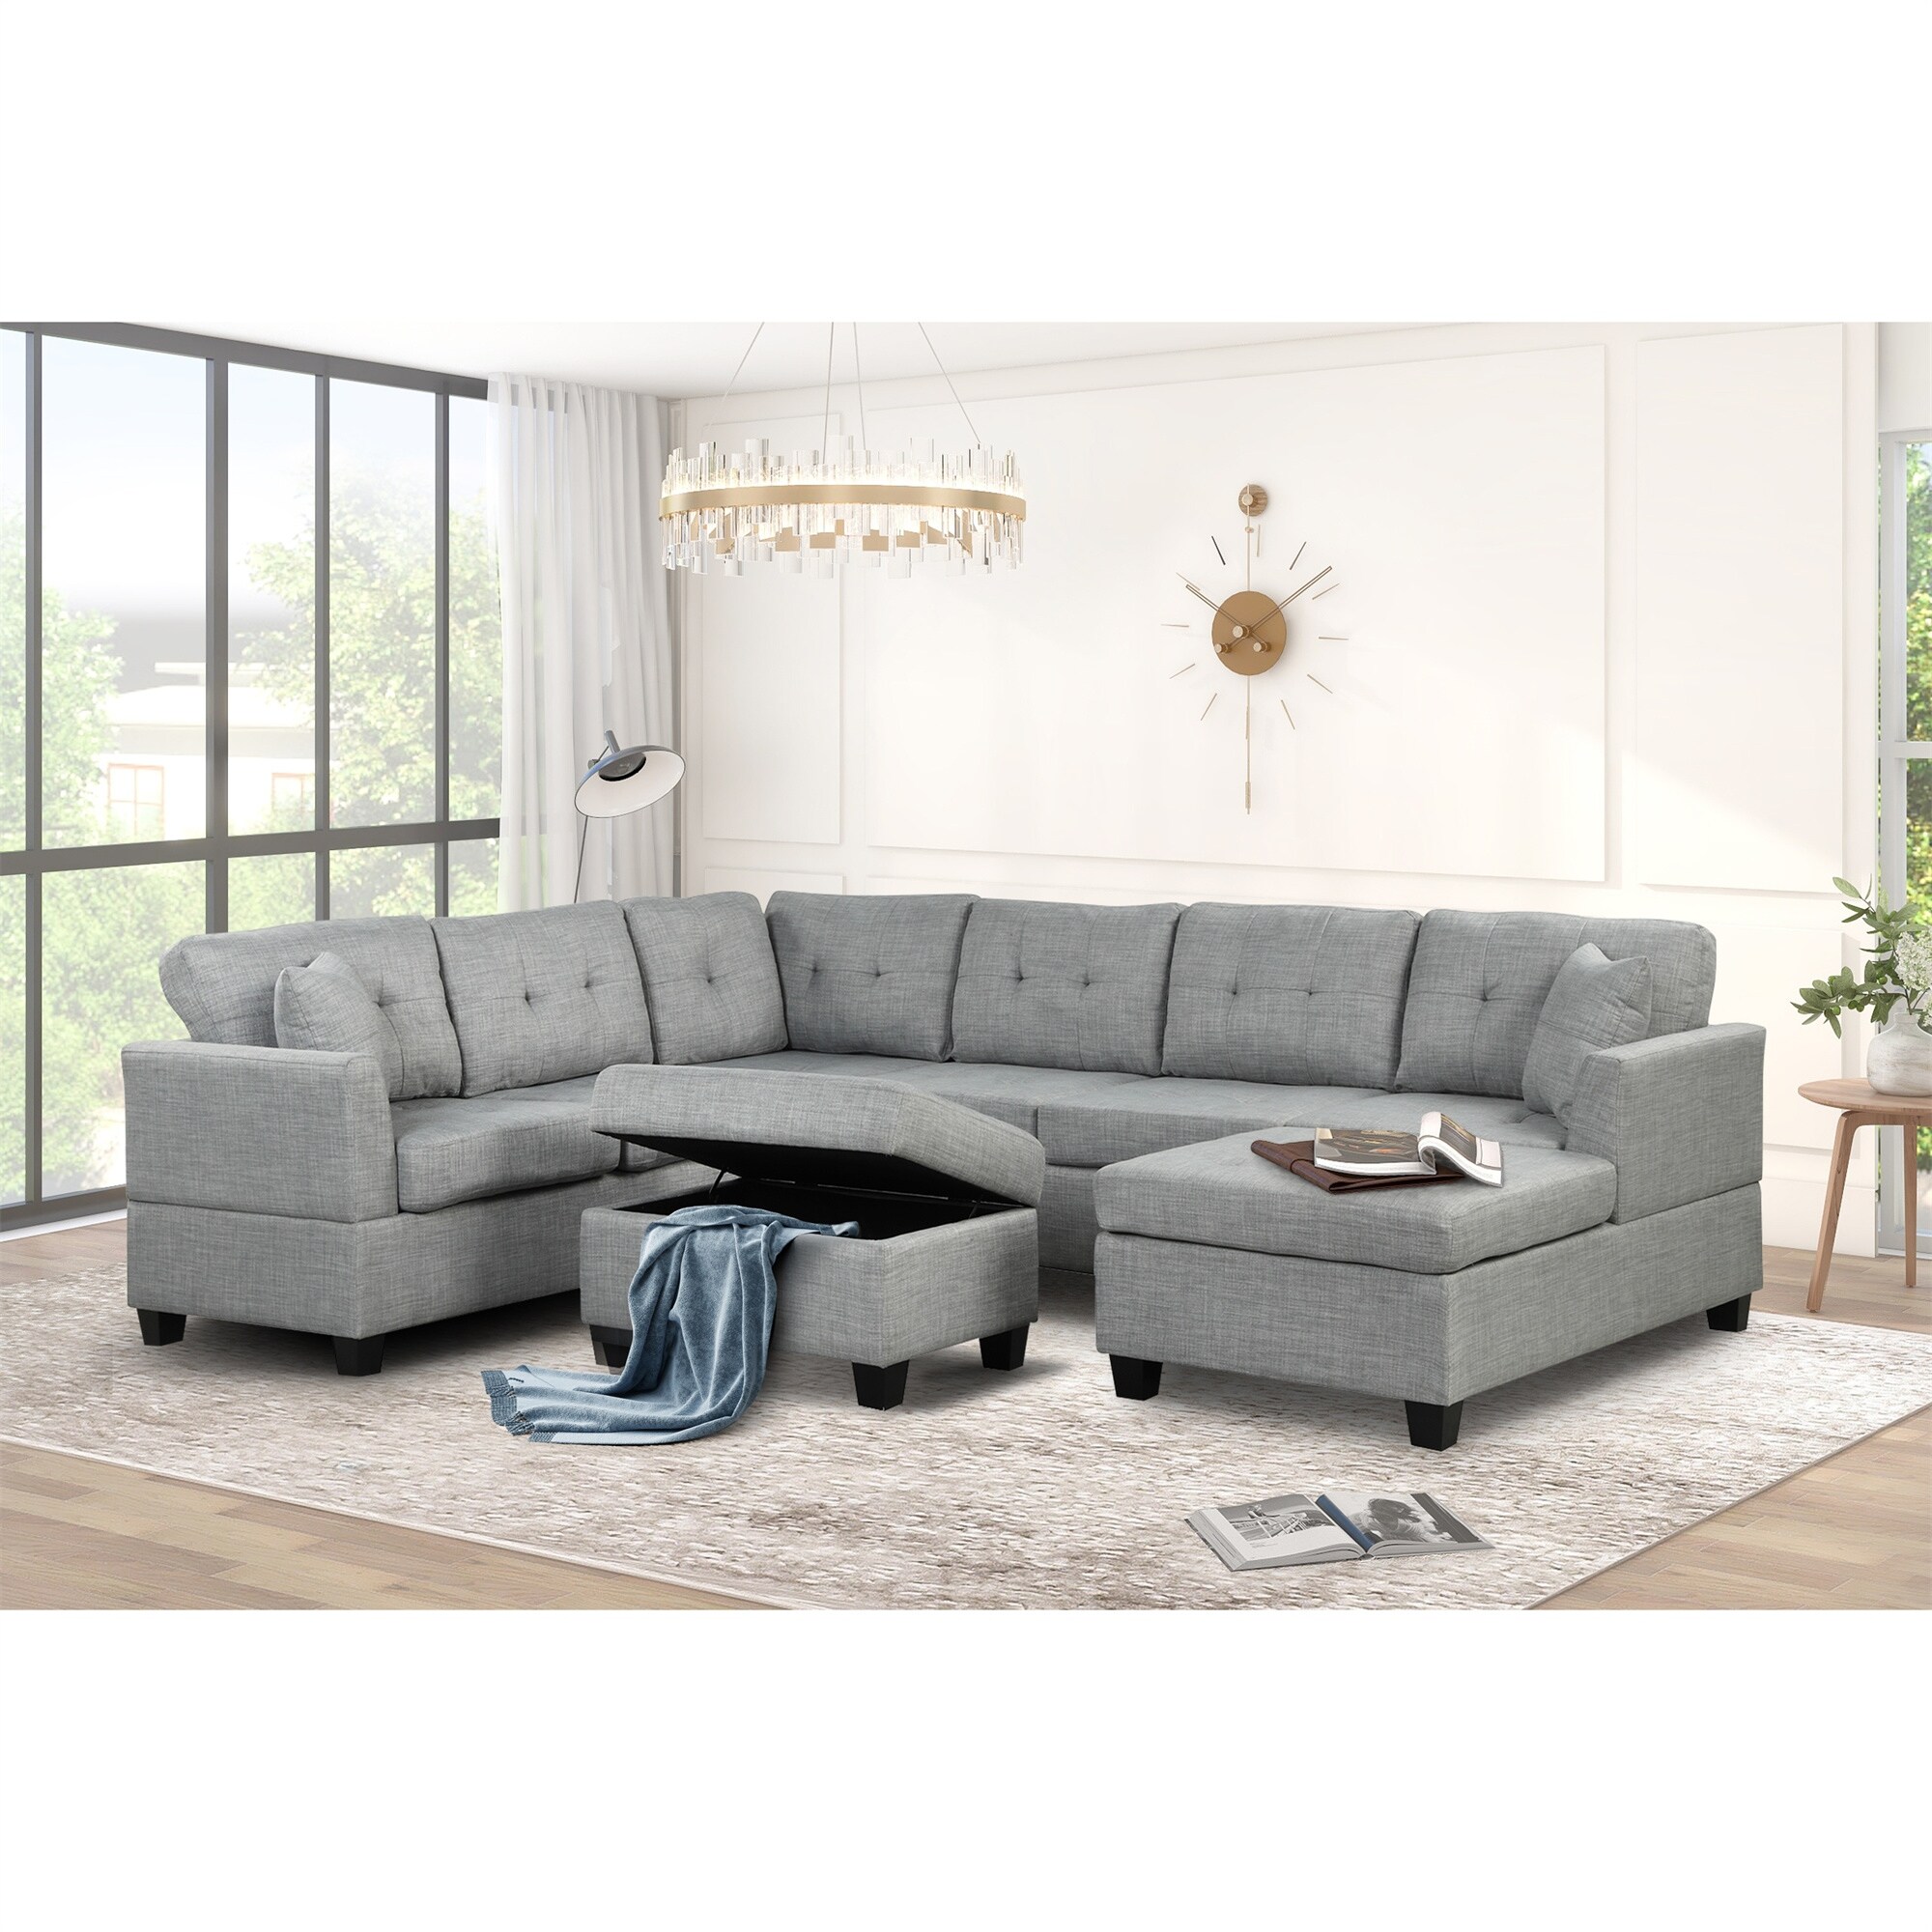 121" Sectional Sofa with Storage Ottoman, Large U Shaped Couch, Grey